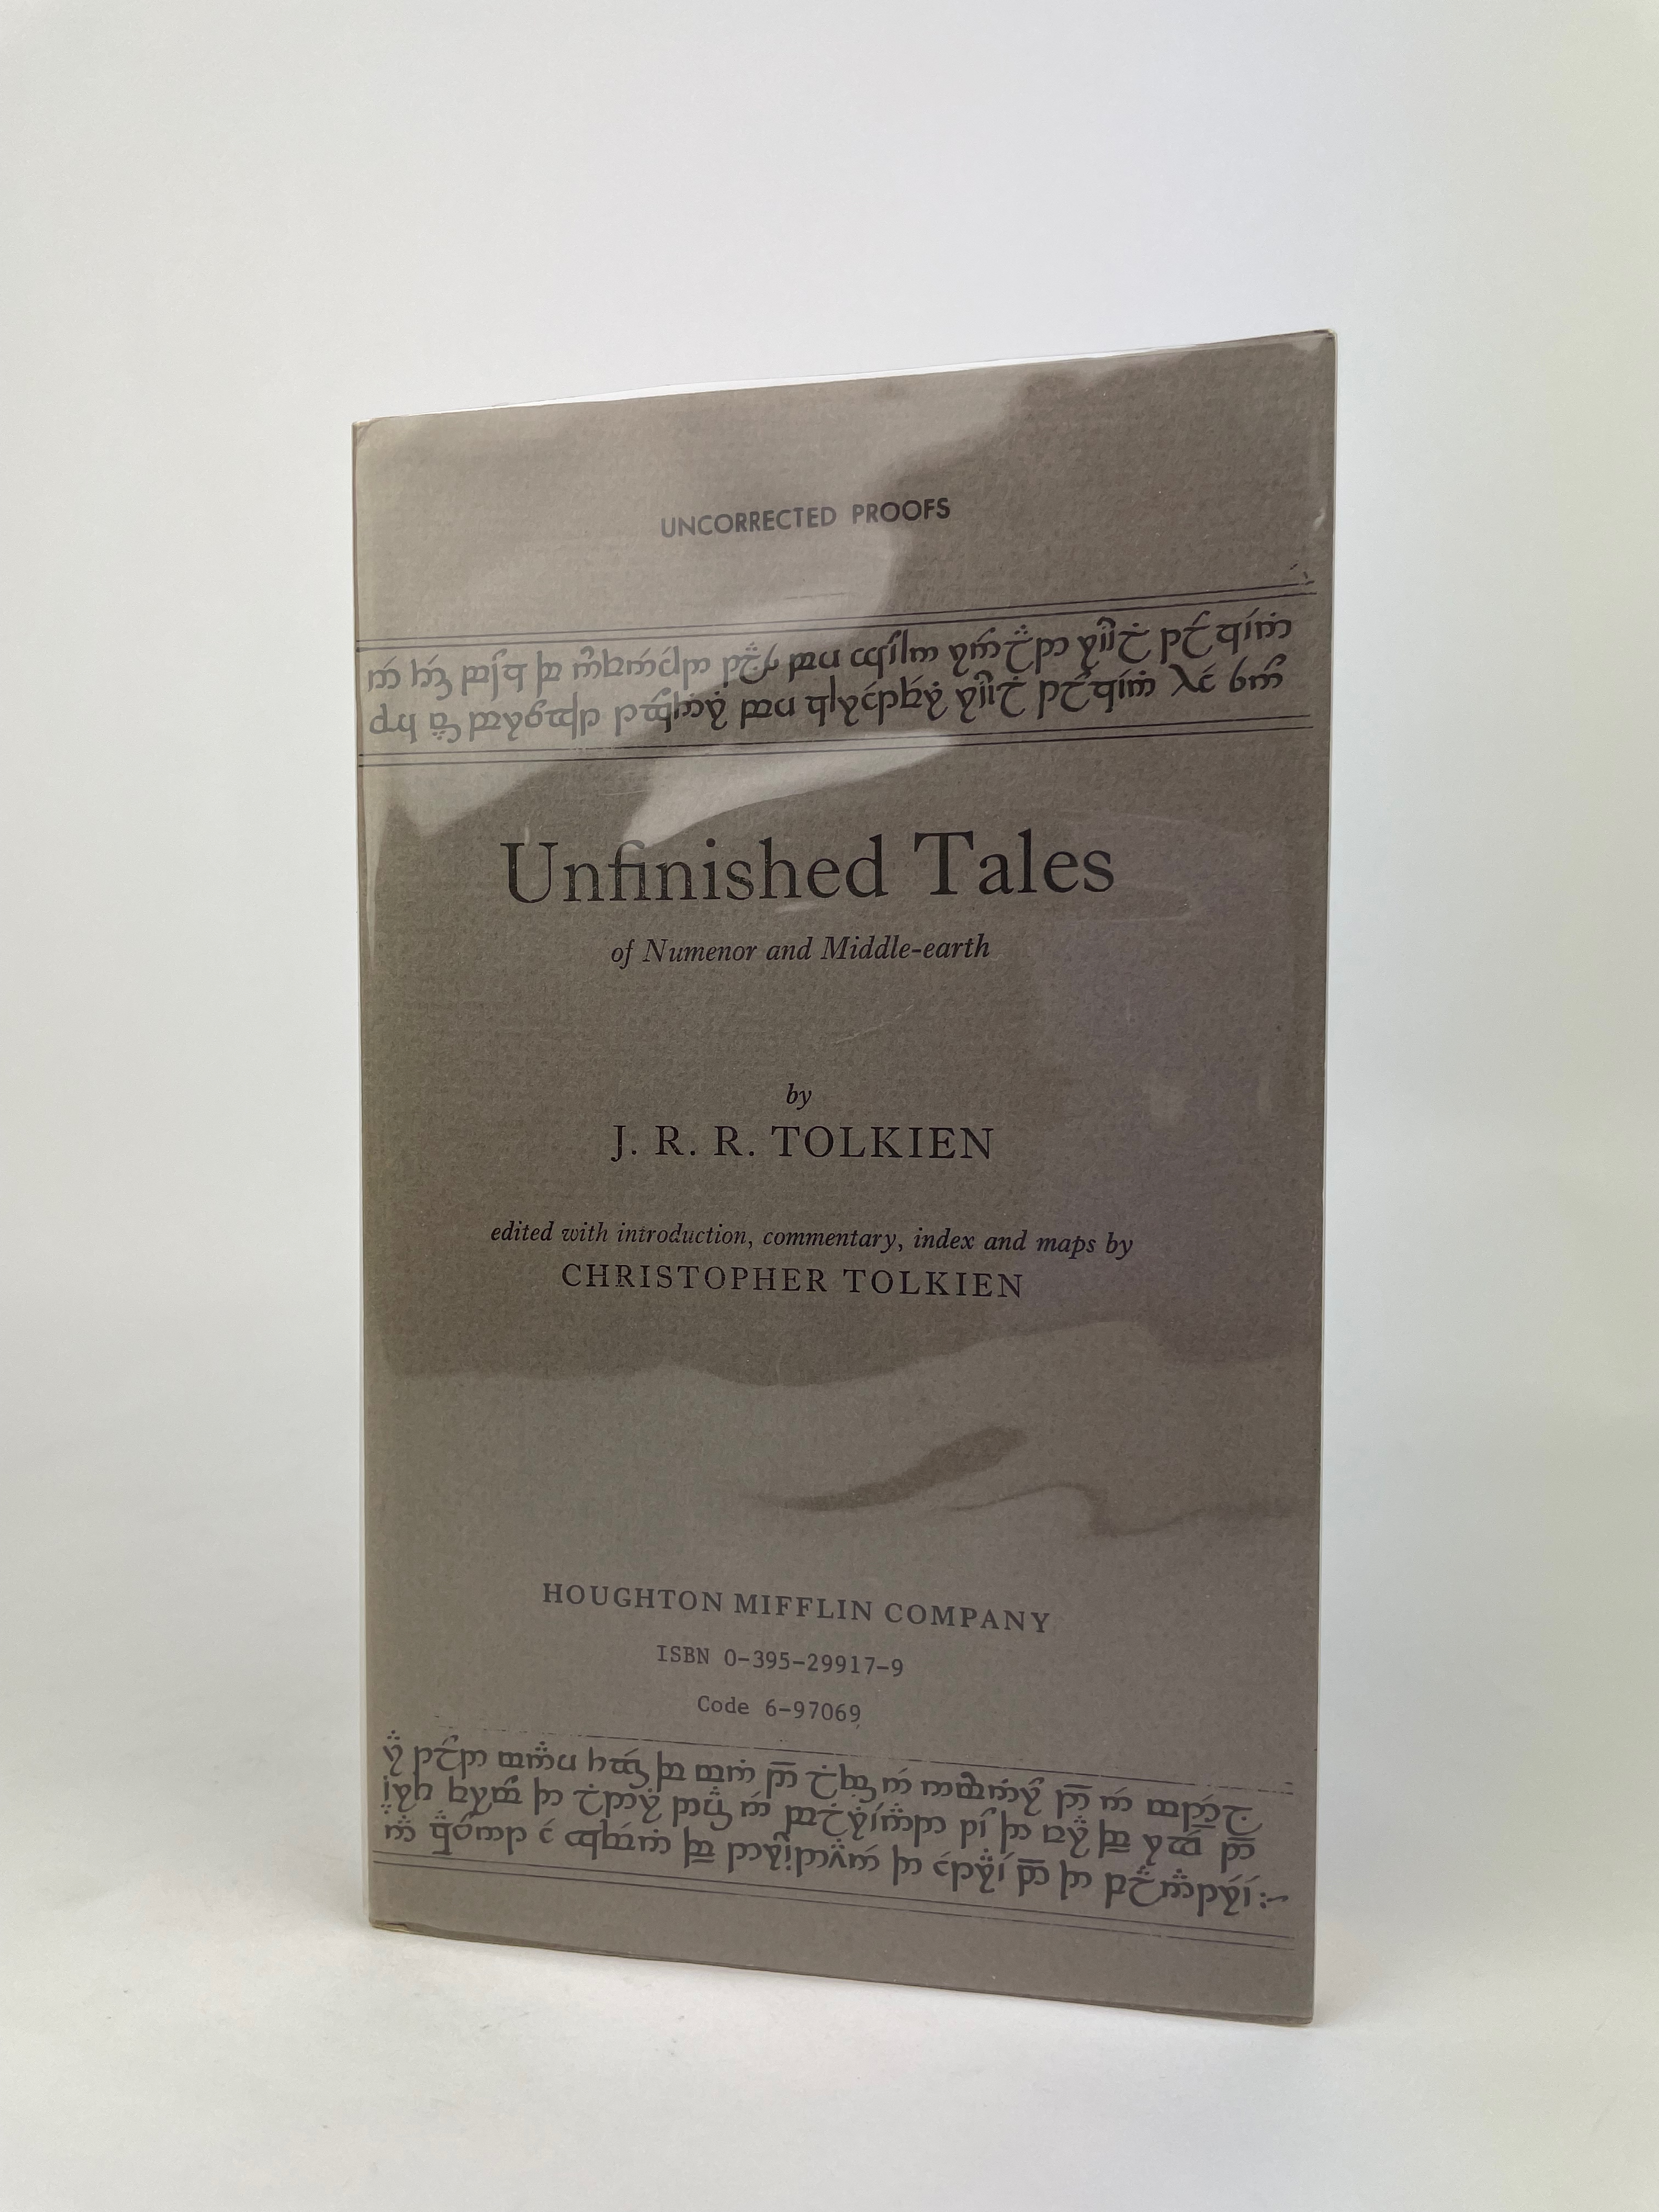 Advance Uncorrected Proof of The Lost Road and Other Writings edited by Christoper Tolkien